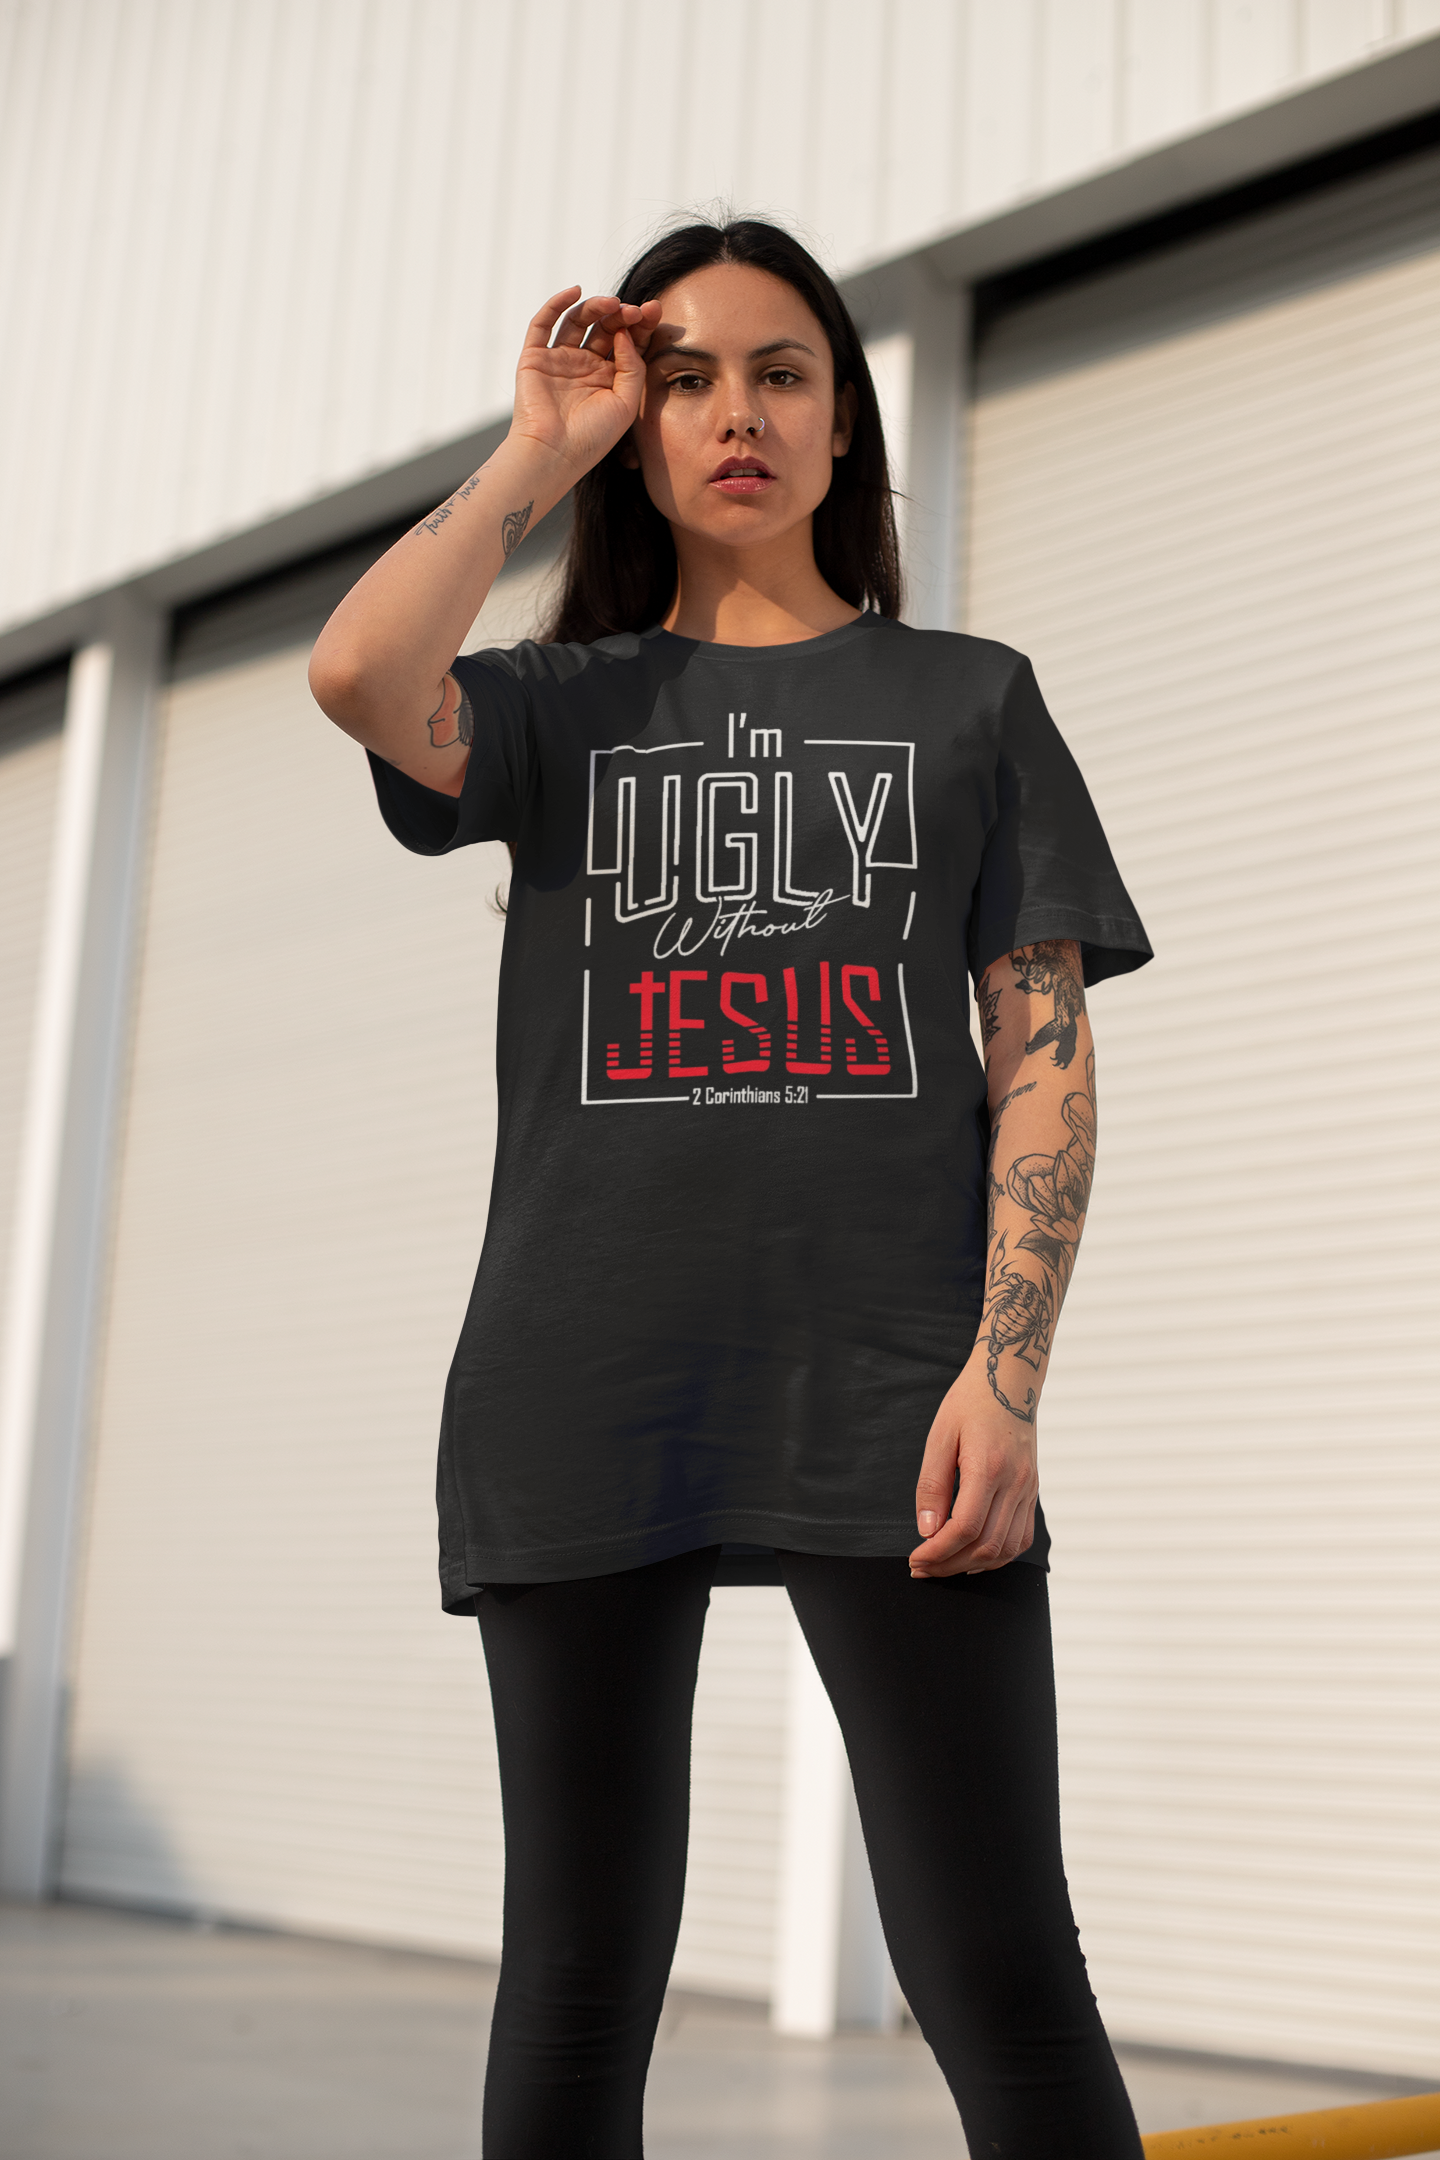 I'm Ugly Without Jesus (Cross)